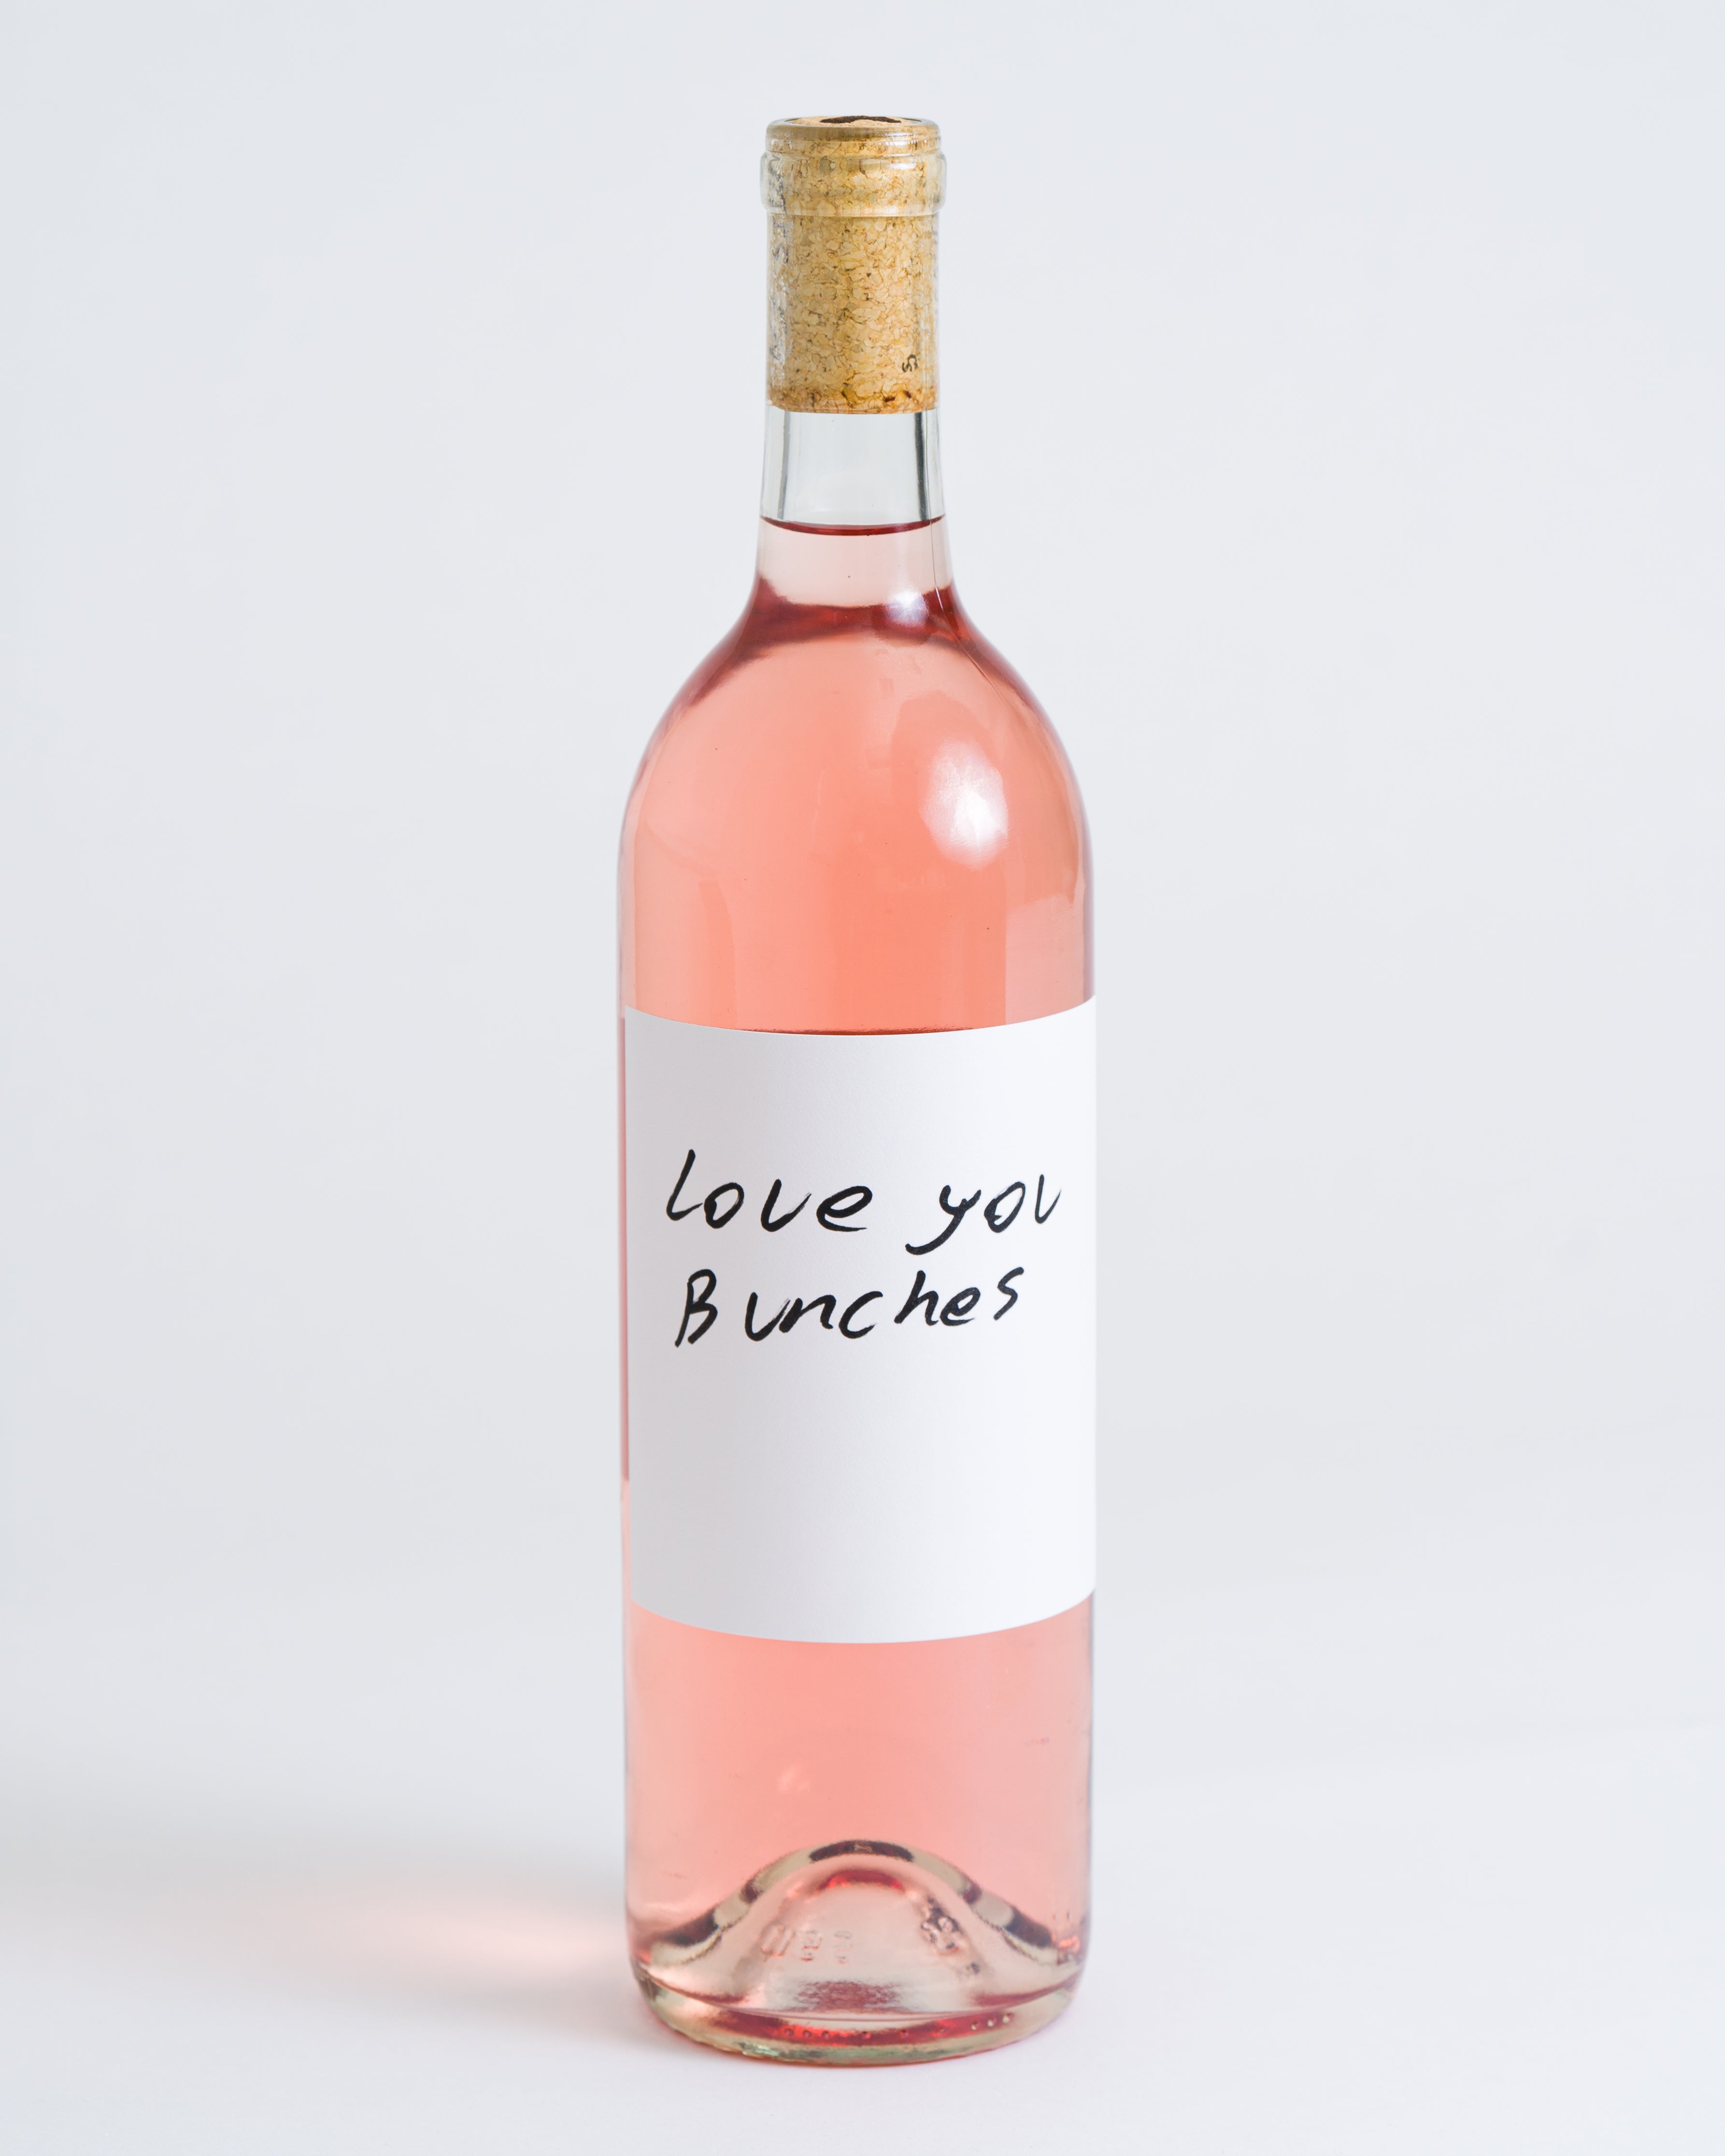 Bottle of Love You Bunches Rosé 